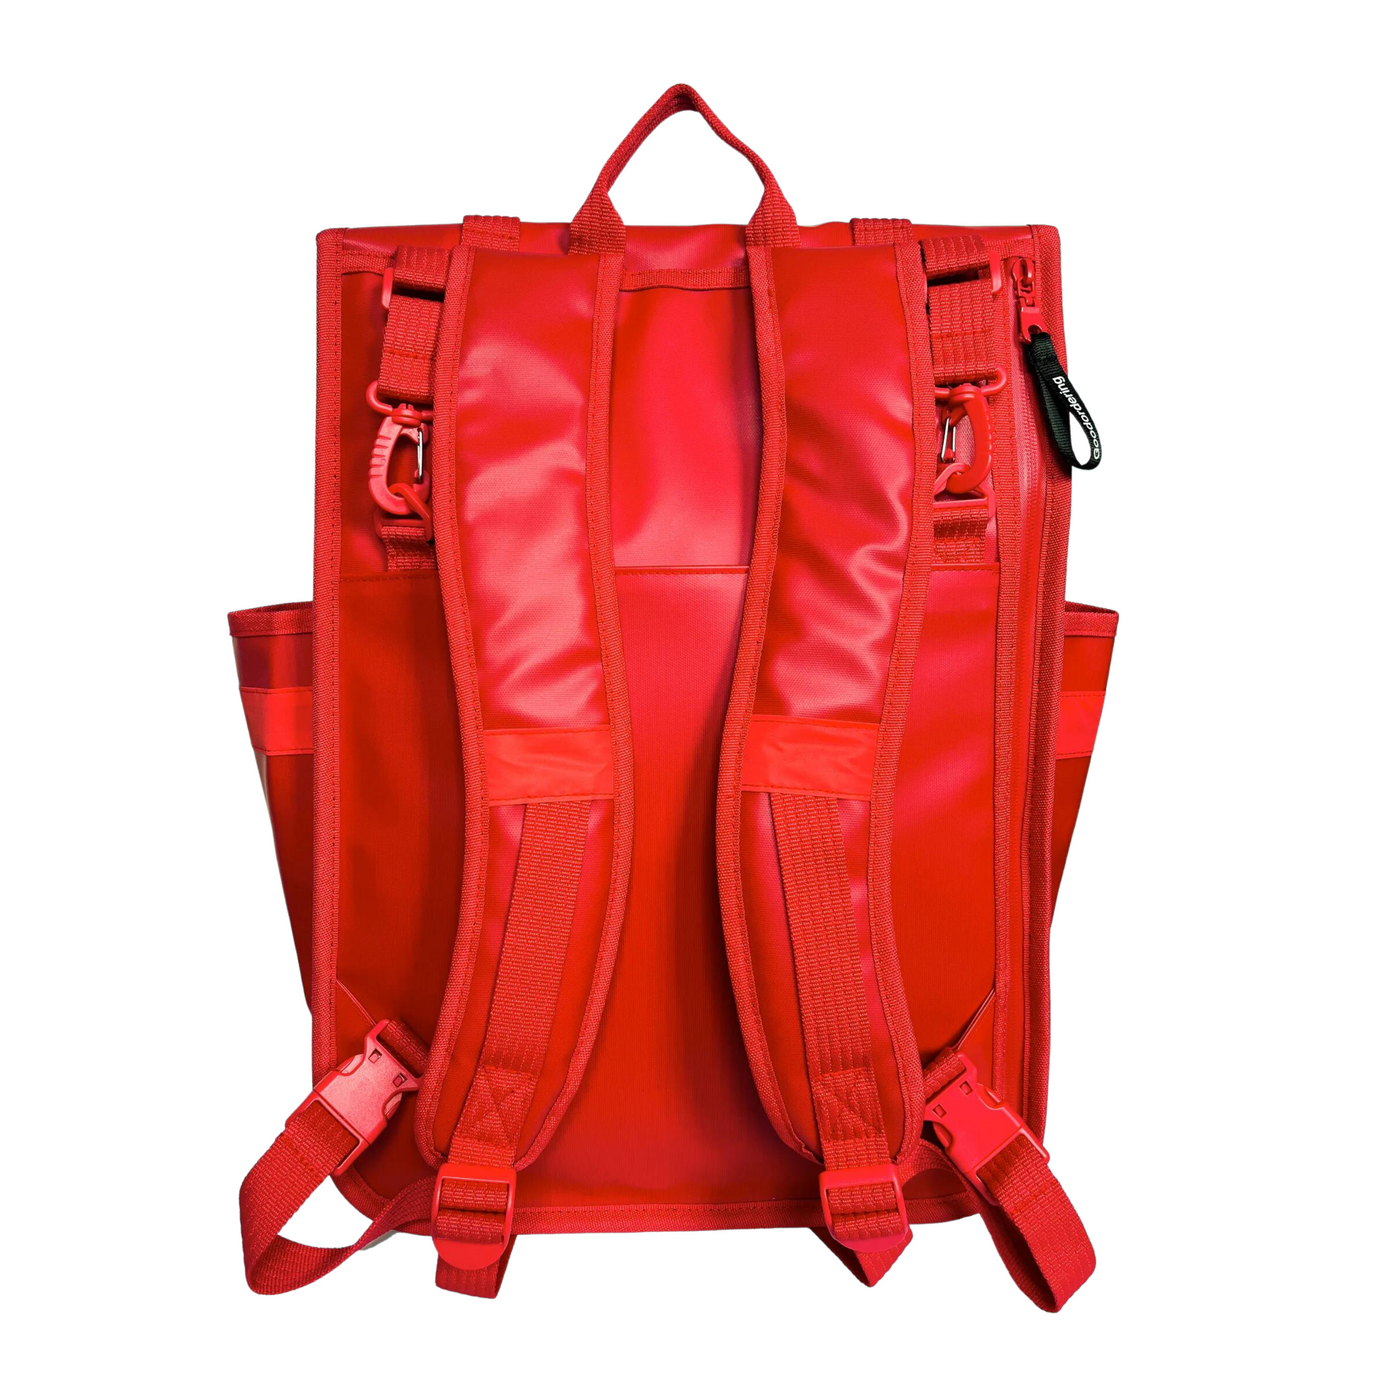 Goodordering Monochrome Rolltop Backpack Pannier Red - Radical Giving